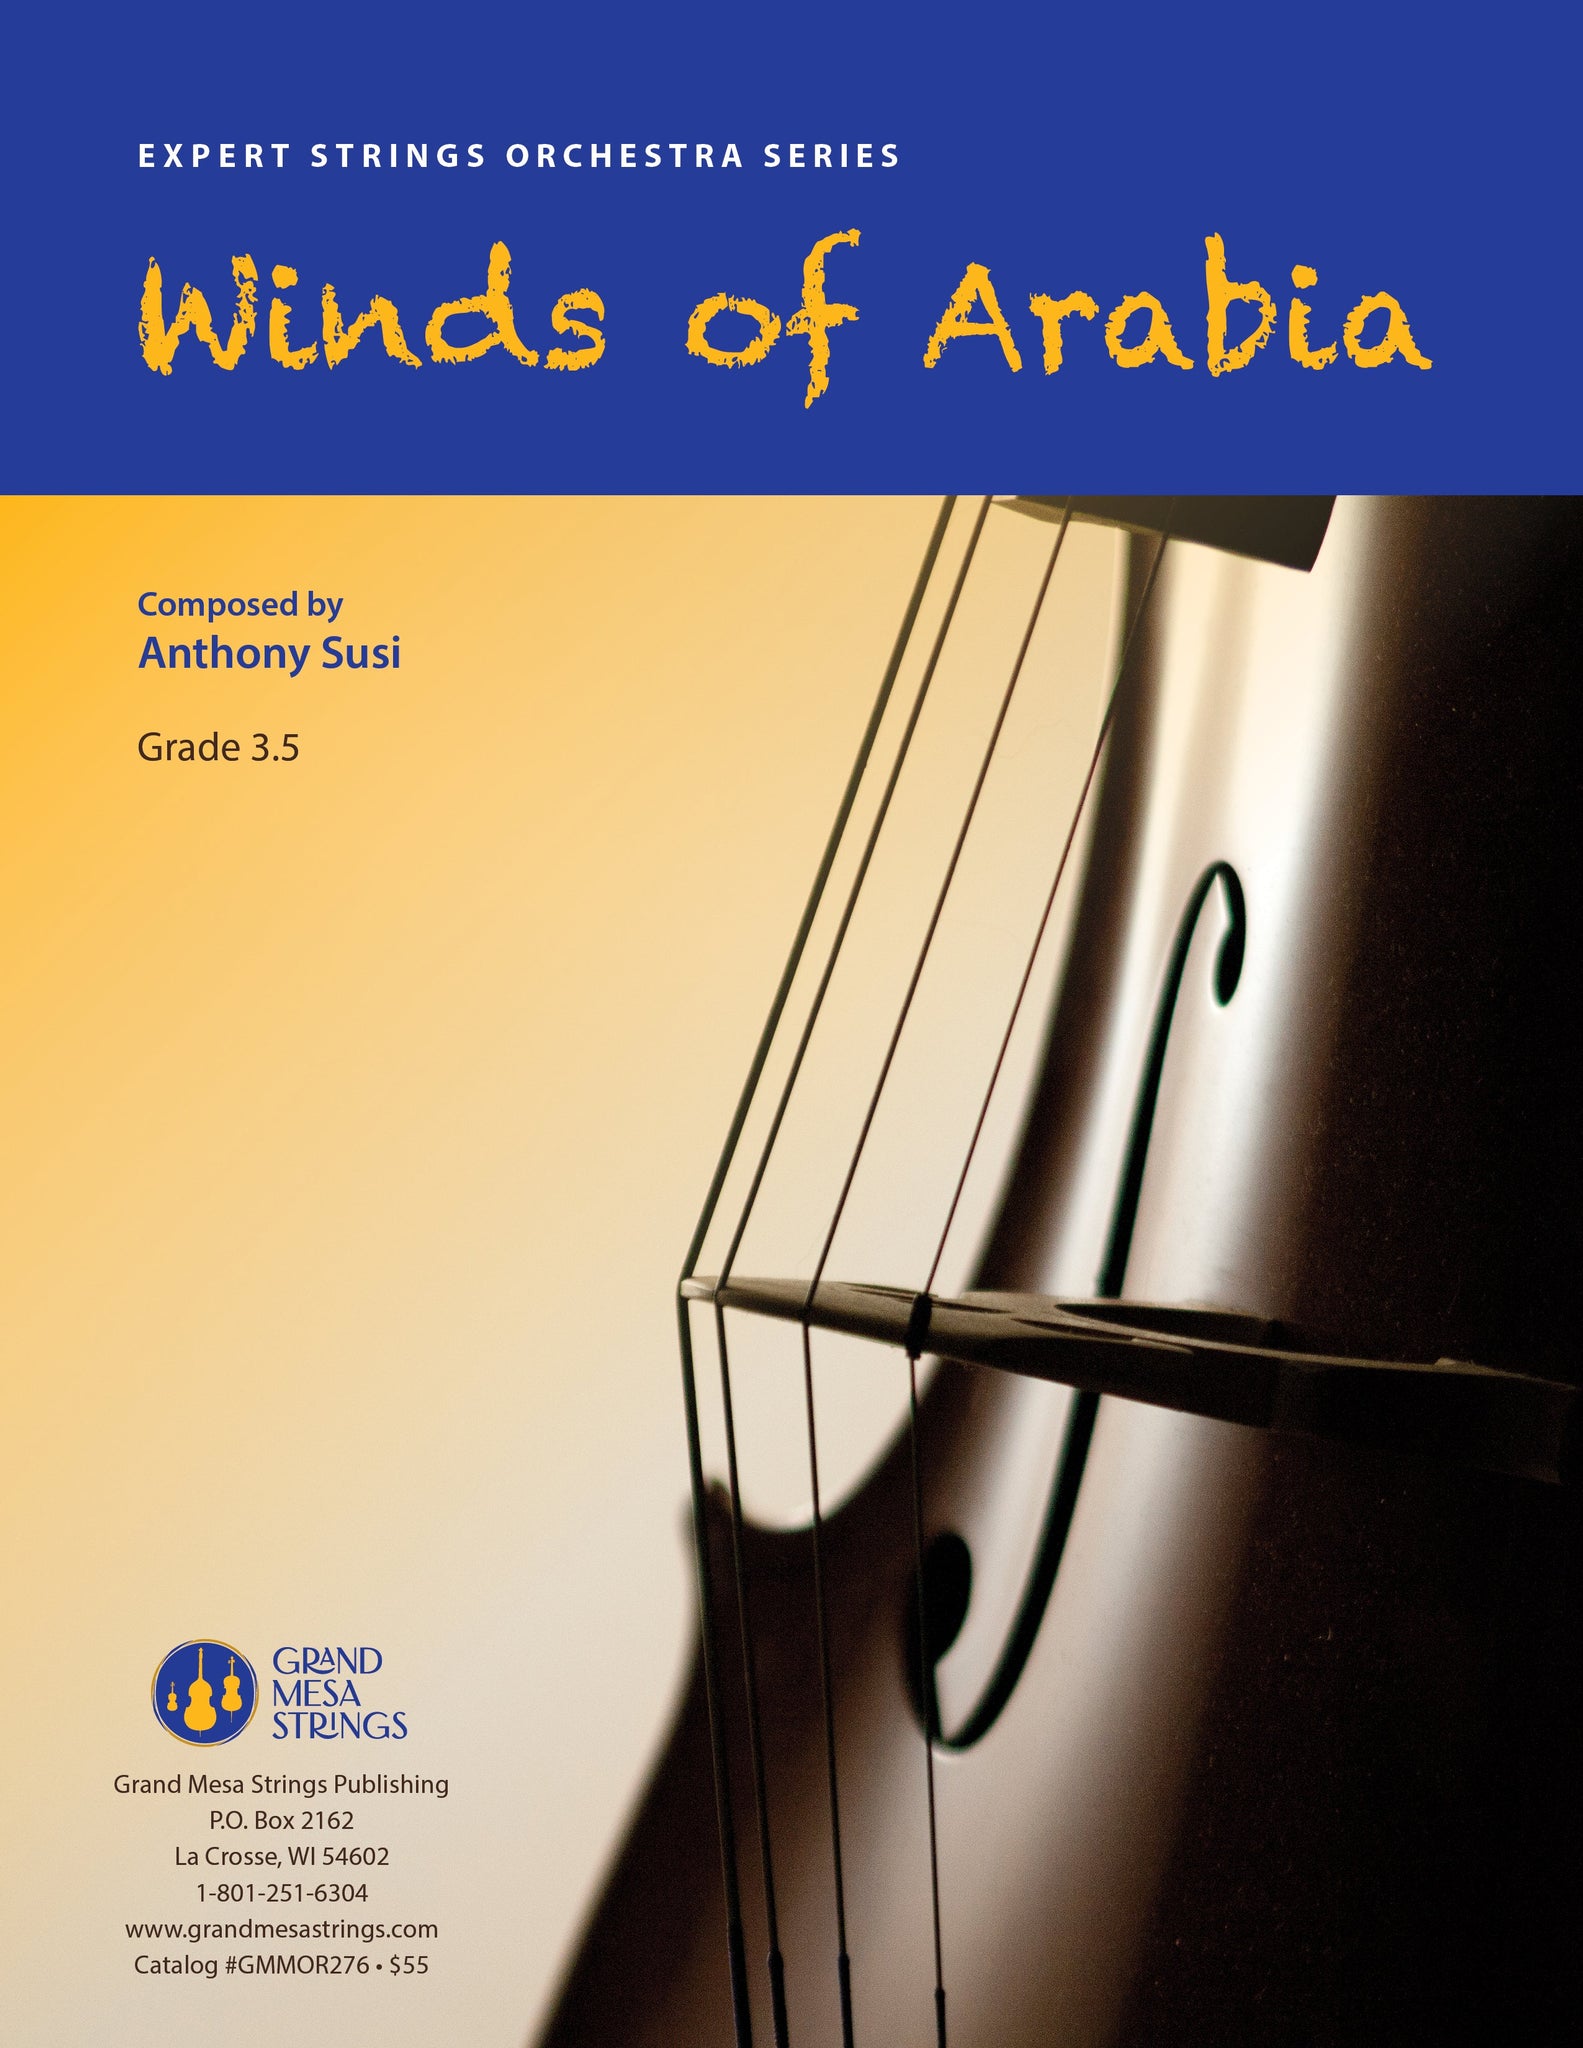 Strings sheet music cover of Winds of Arabia, composed by Anthony Susi.